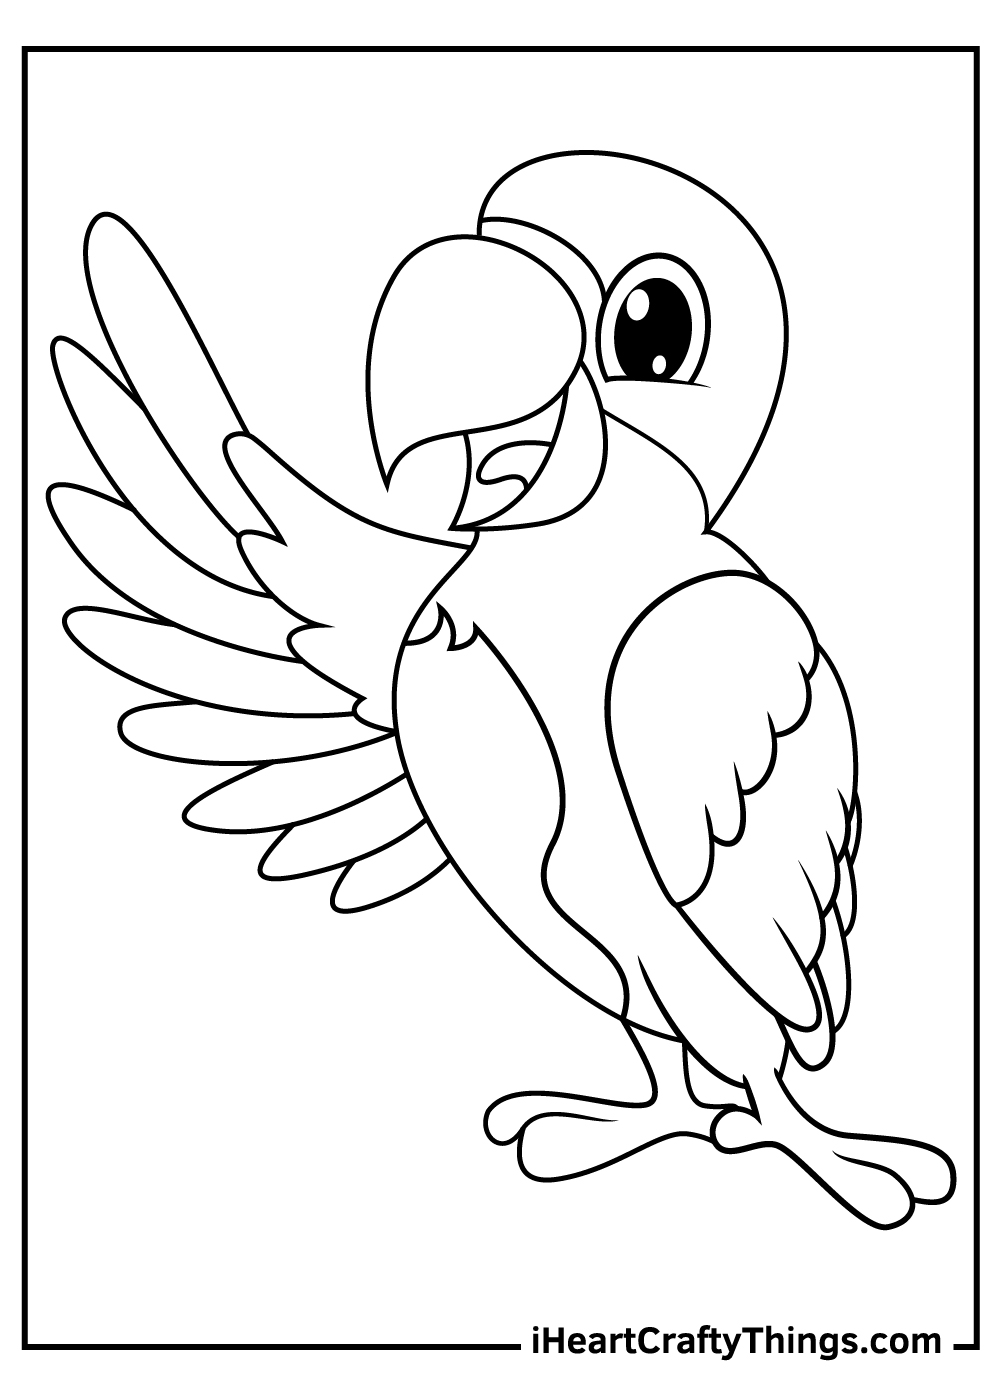 Printable Parrots Coloring Pages (Updated 2023)